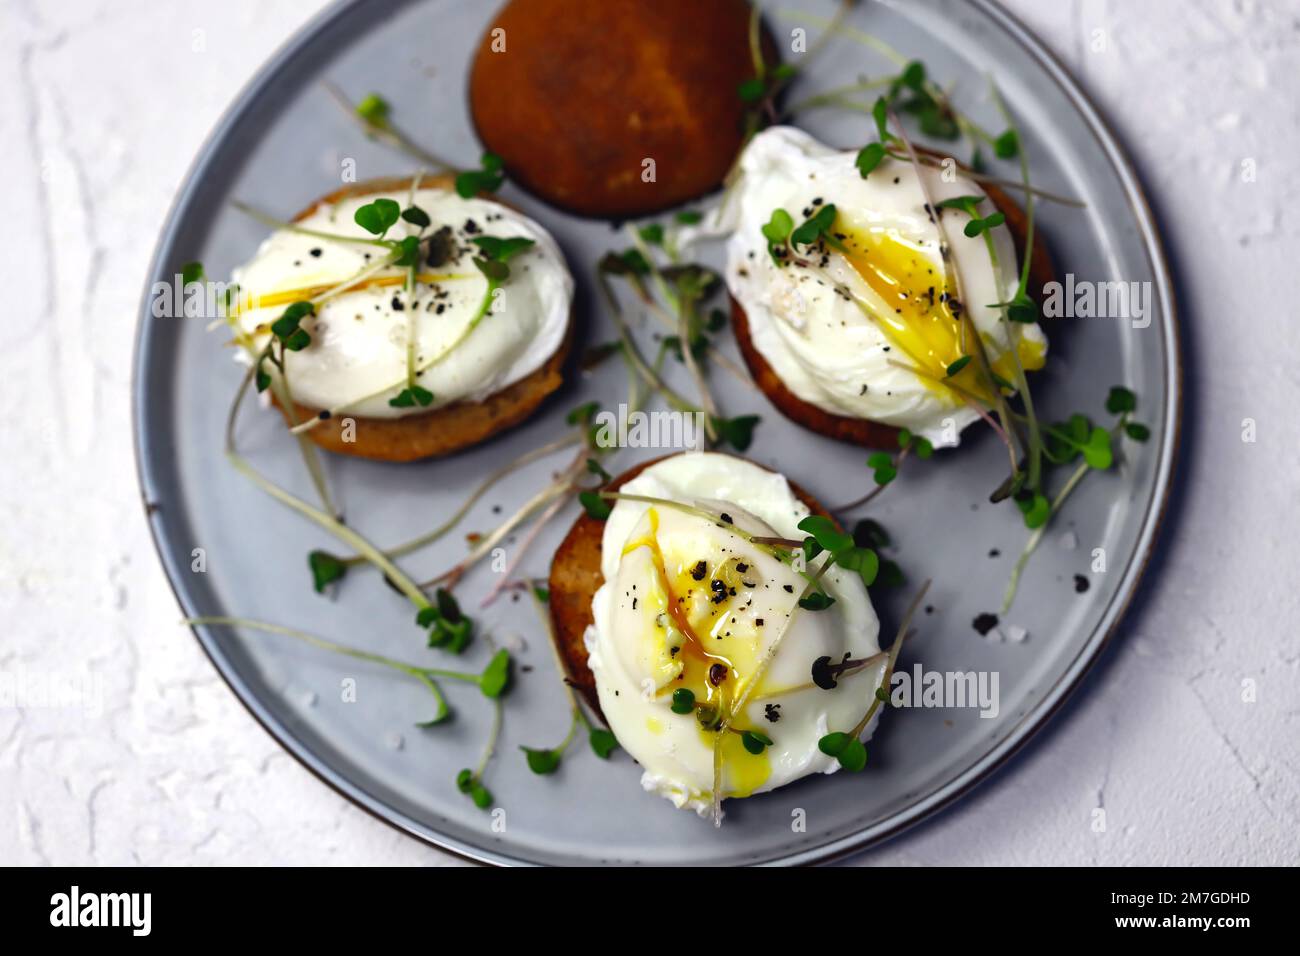 Poached eggs with microgreens on a crispy bun on a plate. Stock Photo